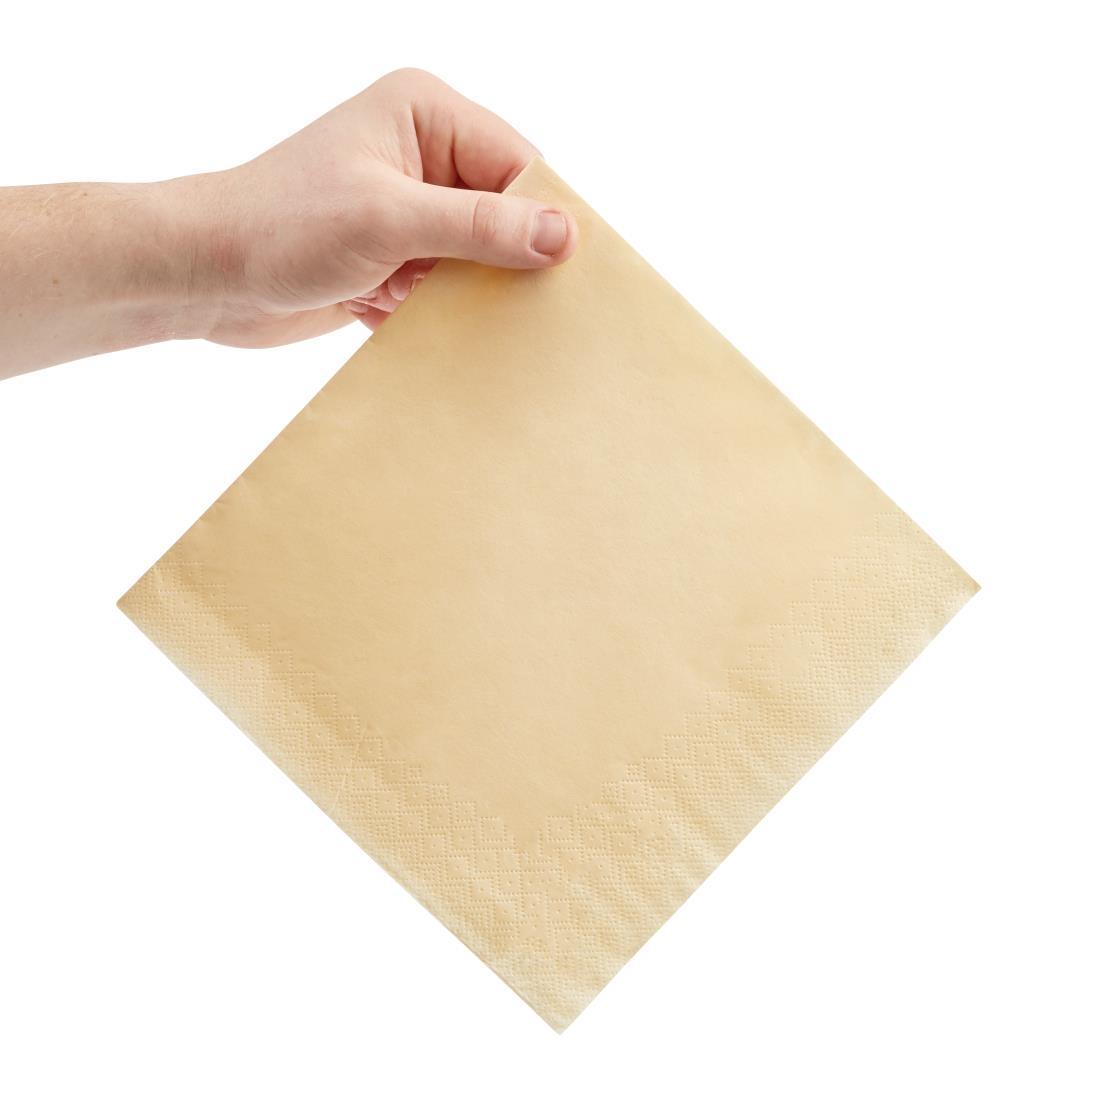 Fiesta Recyclable Dinner Napkin Cream 40x40cm 3ply 1/4 Fold (Pack of 1000) - FE252  - 3